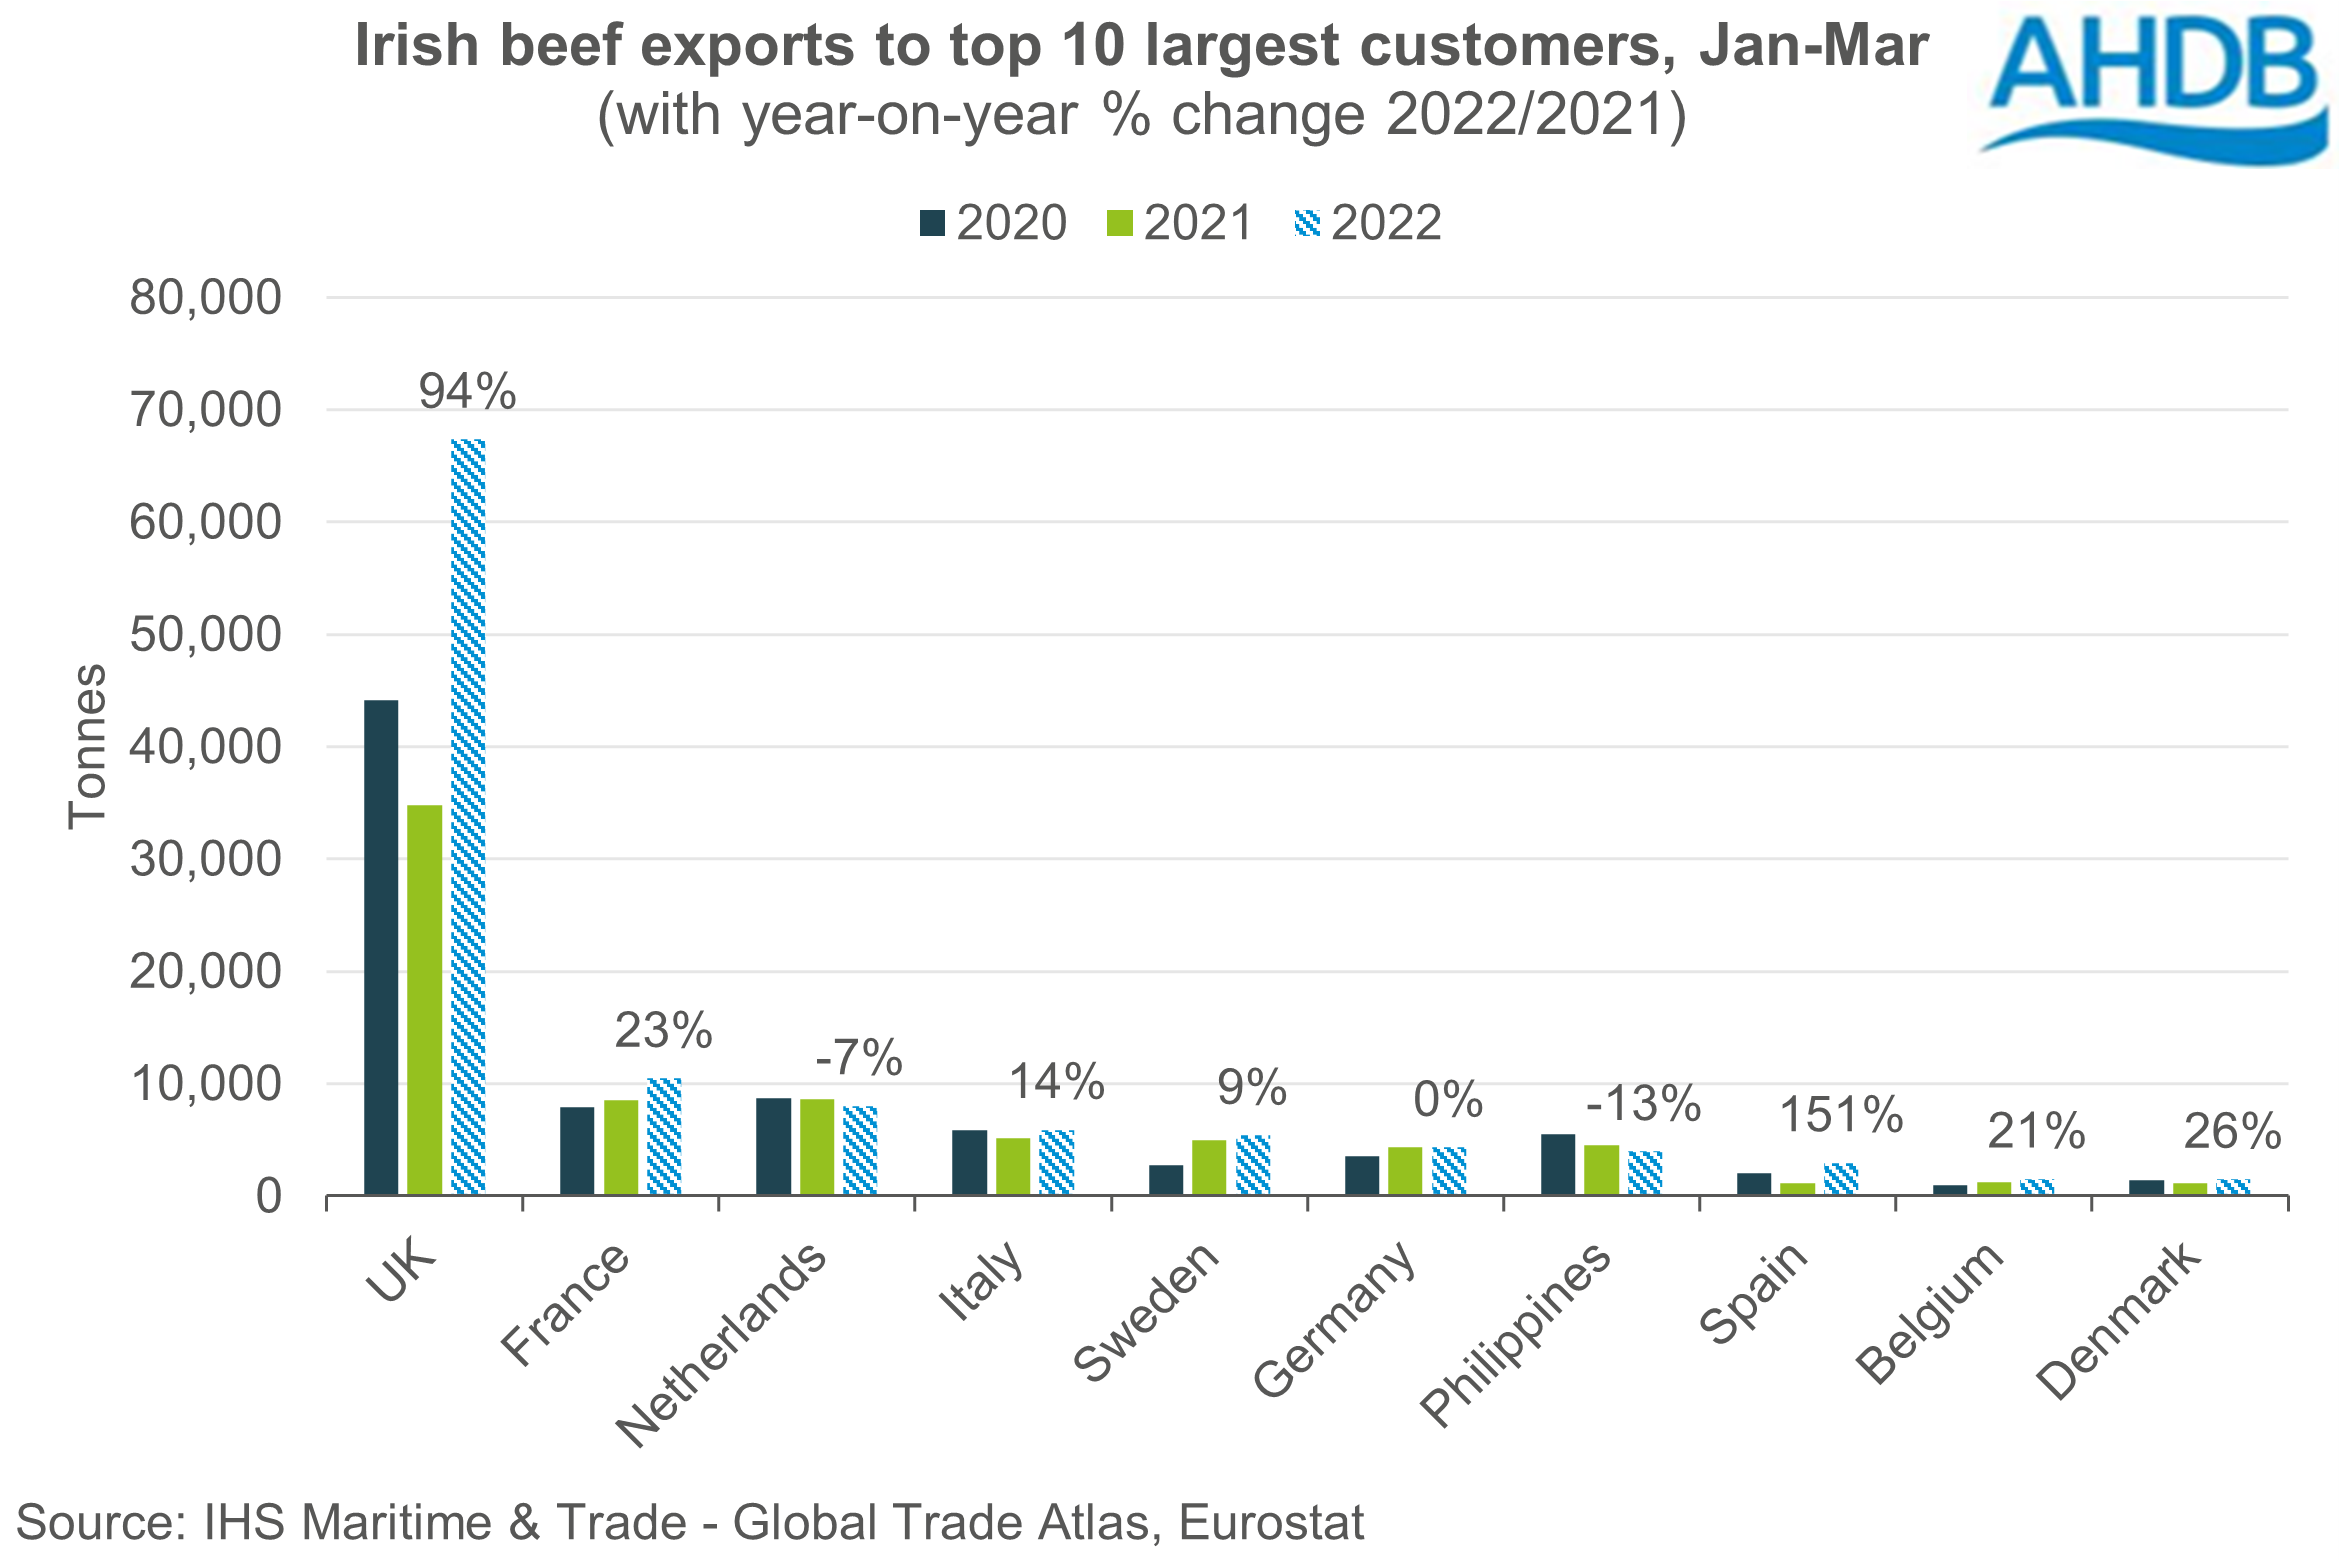 Graph showing Irish beef exports to top 10 customers from Jan-Mar 2022